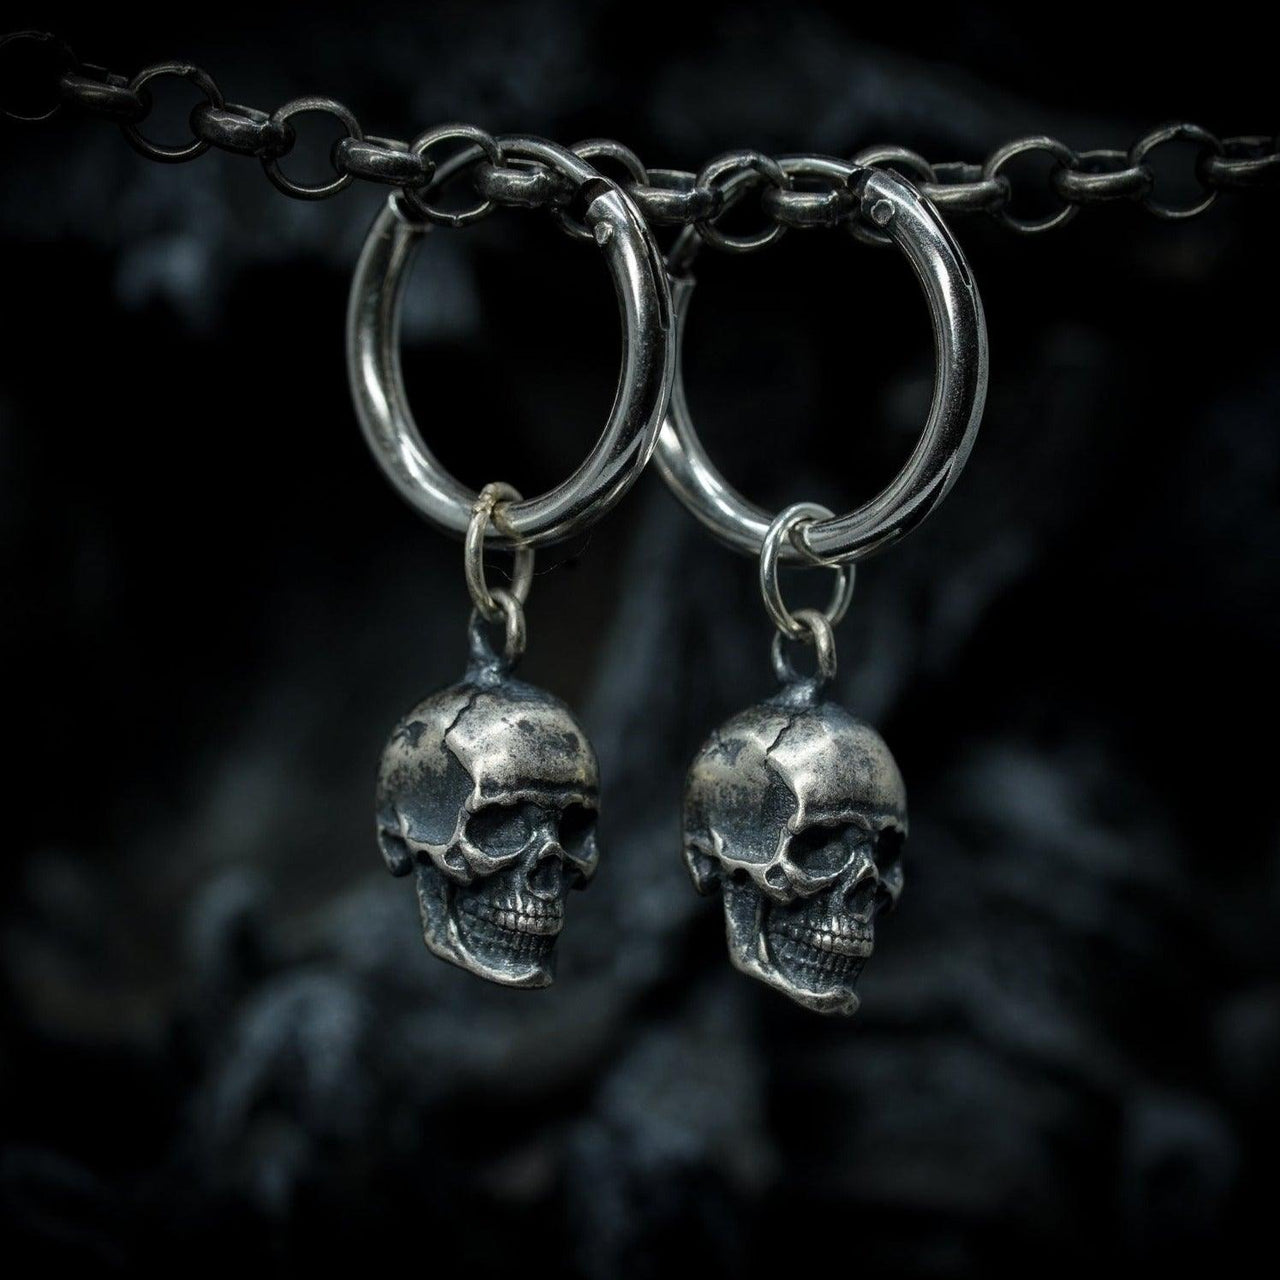 Pair of Skull Drops by Black Feather Design